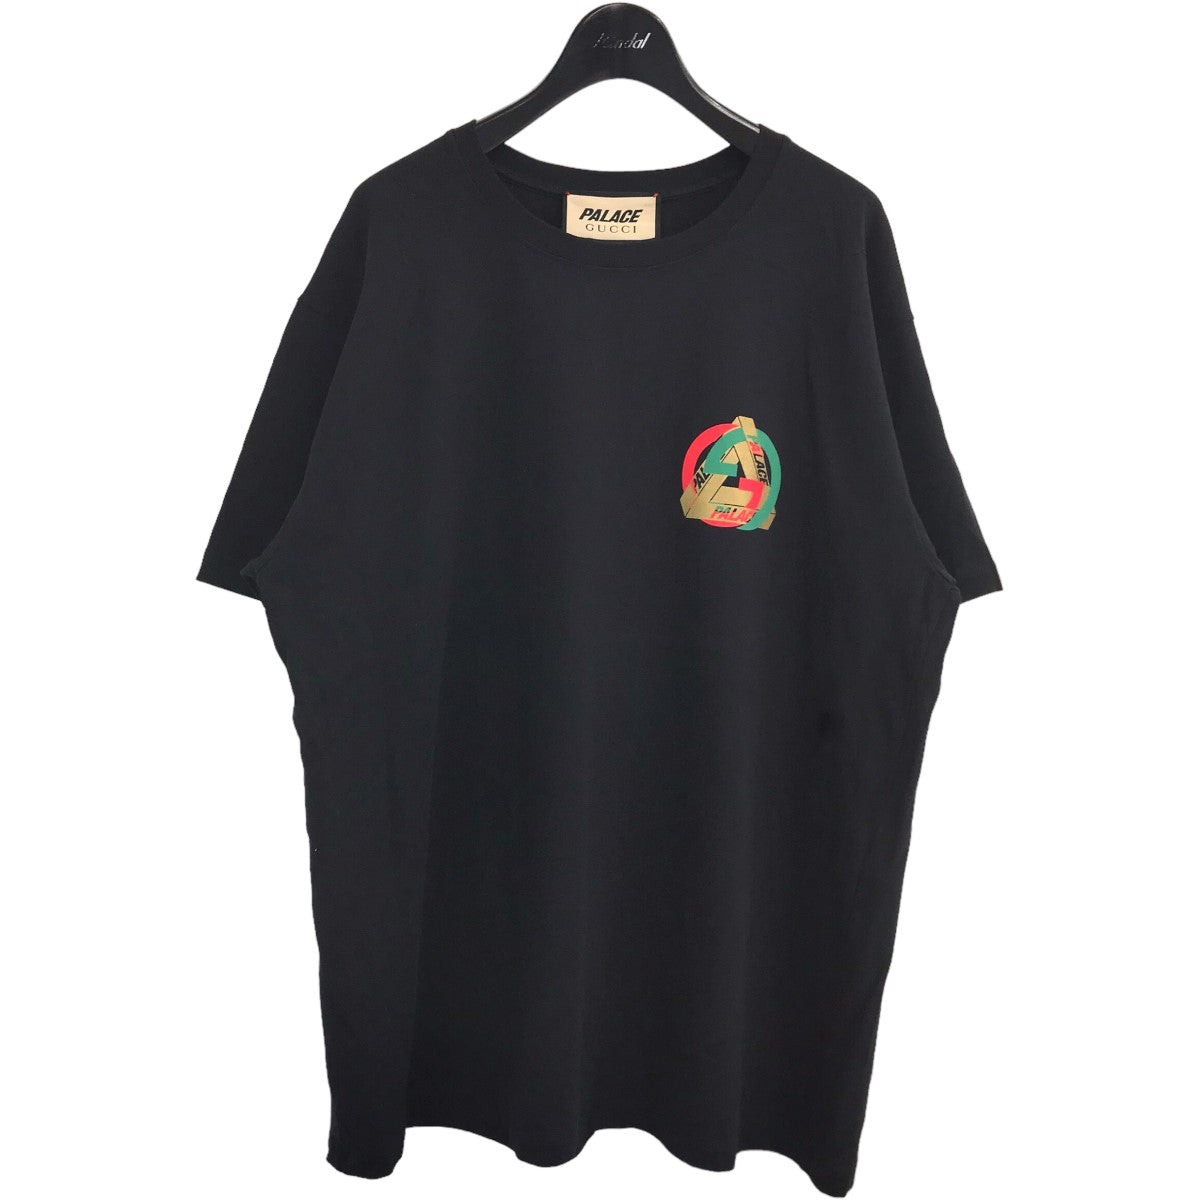 GUCCI×PALACE 「Printed Heavy Cotton Jersey」ロゴプリントＴシャツ 